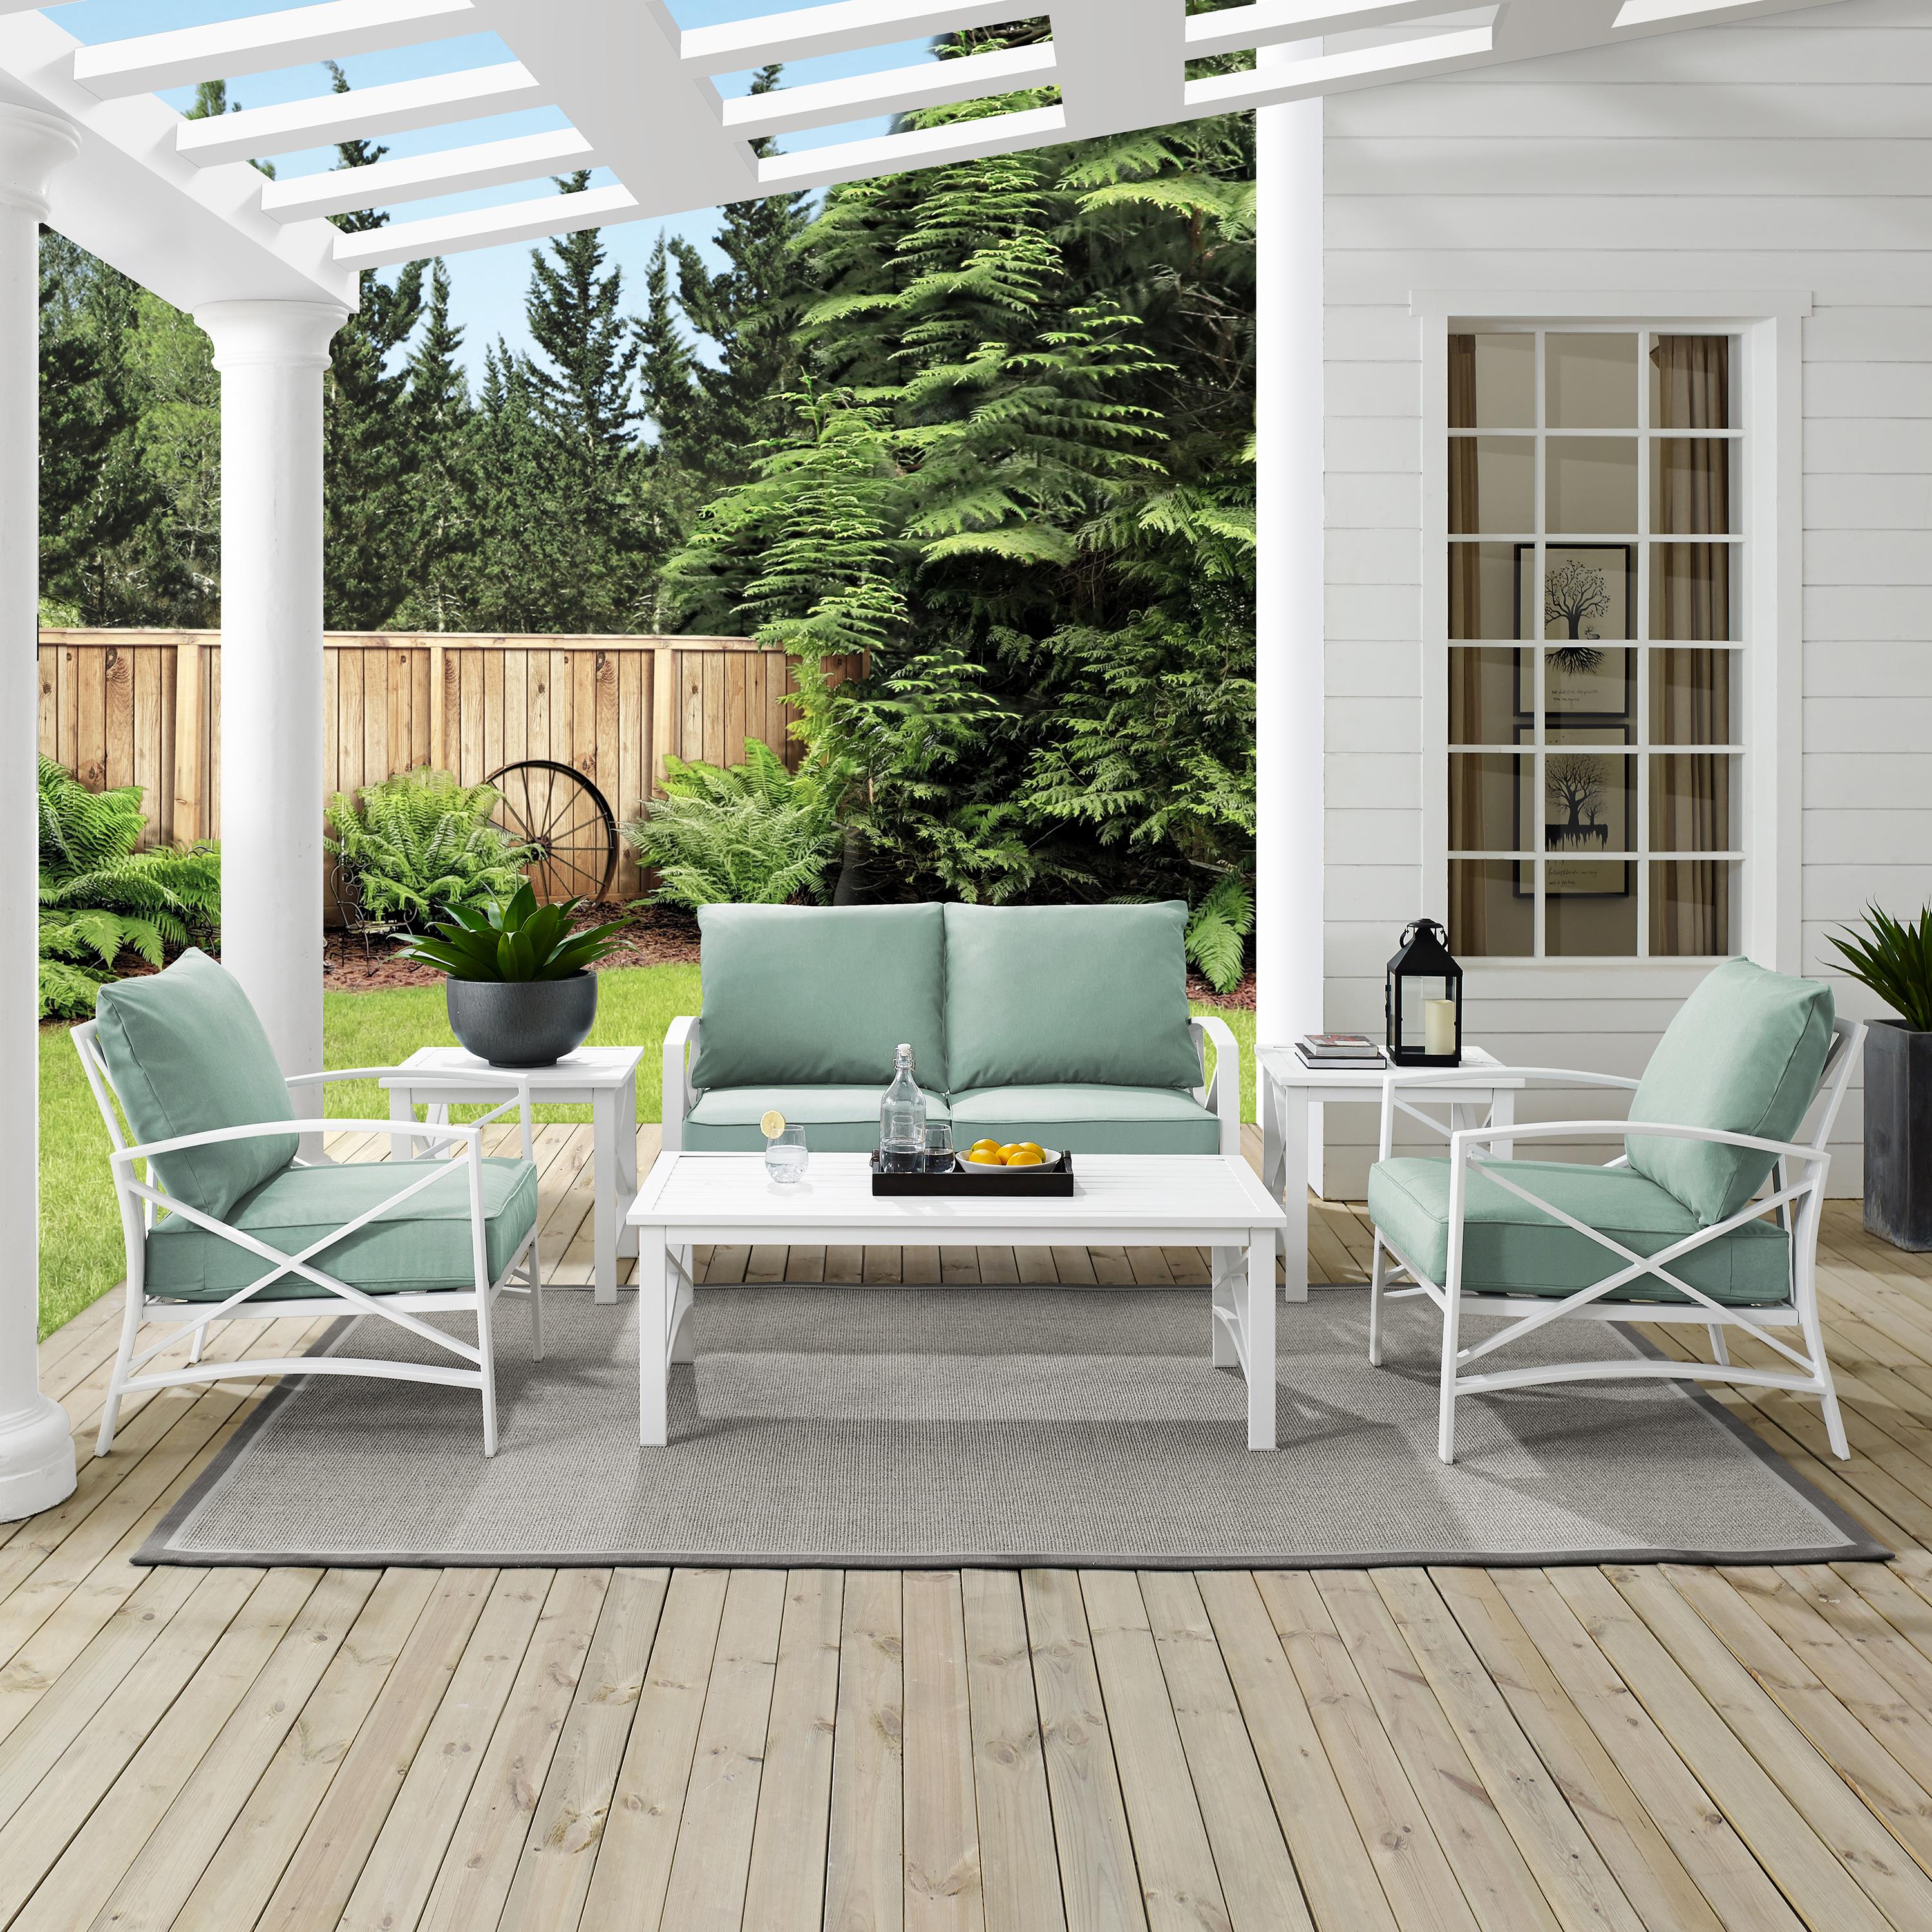 Crosley Kaplan 6Pc Outdoor Conversation Set- Loveseat, 2 Chairs, 2 Side Tables, Coffee Table - image 2 of 6